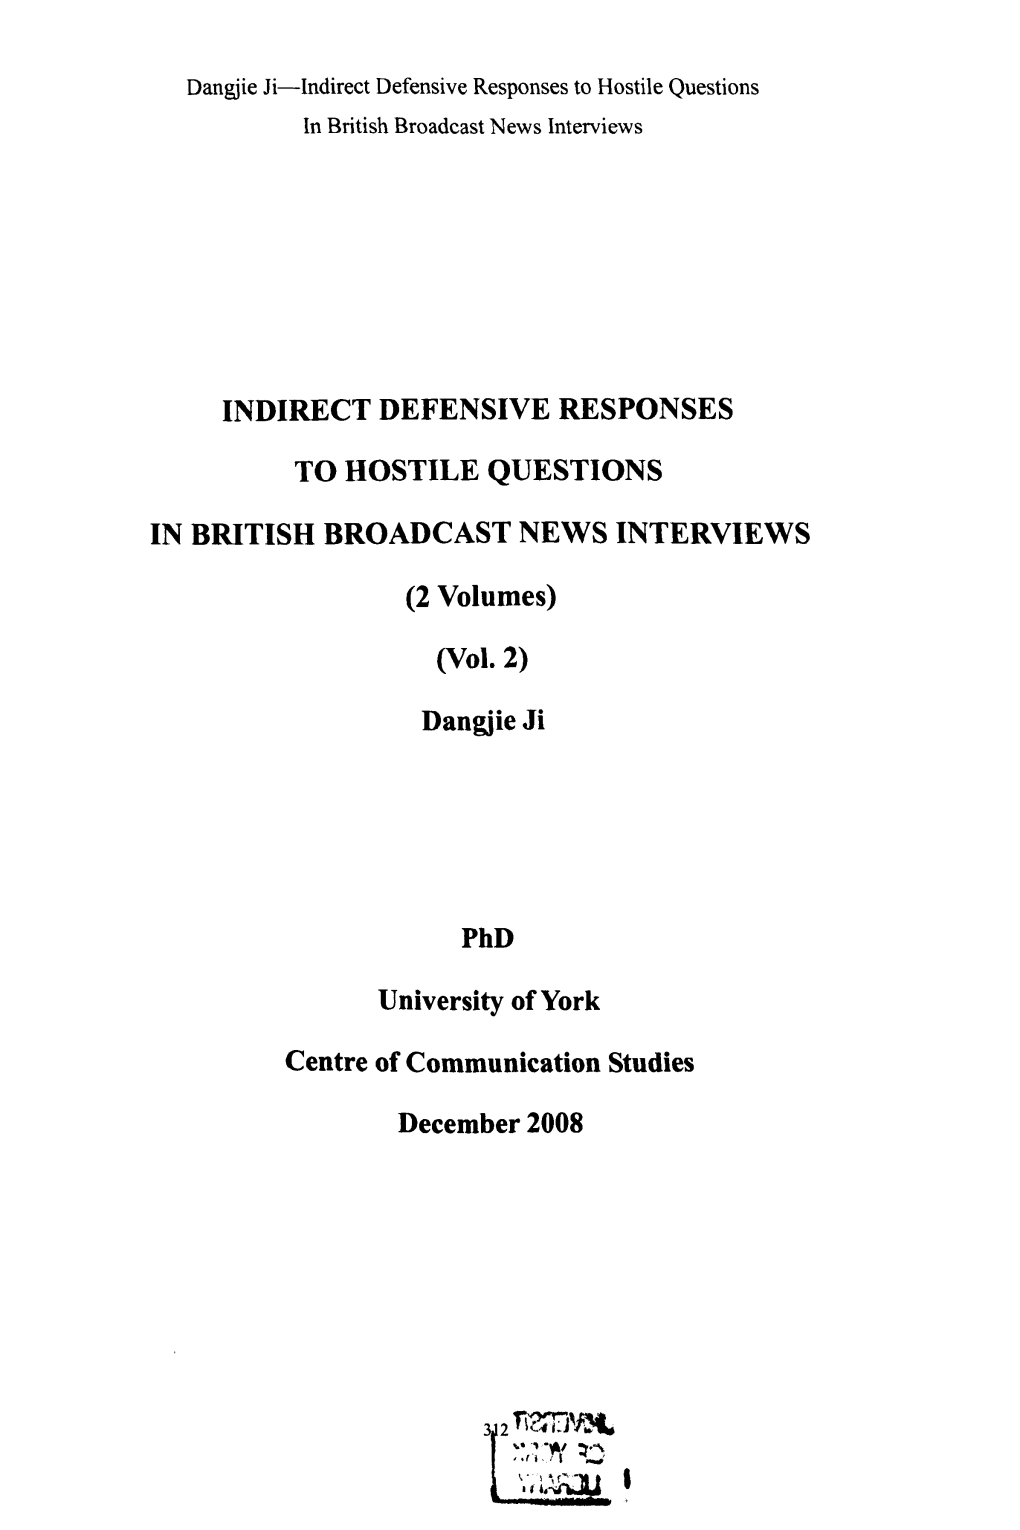 Indirect Defensive Responses to Hostile Questions in British Broadcastnews Interviews